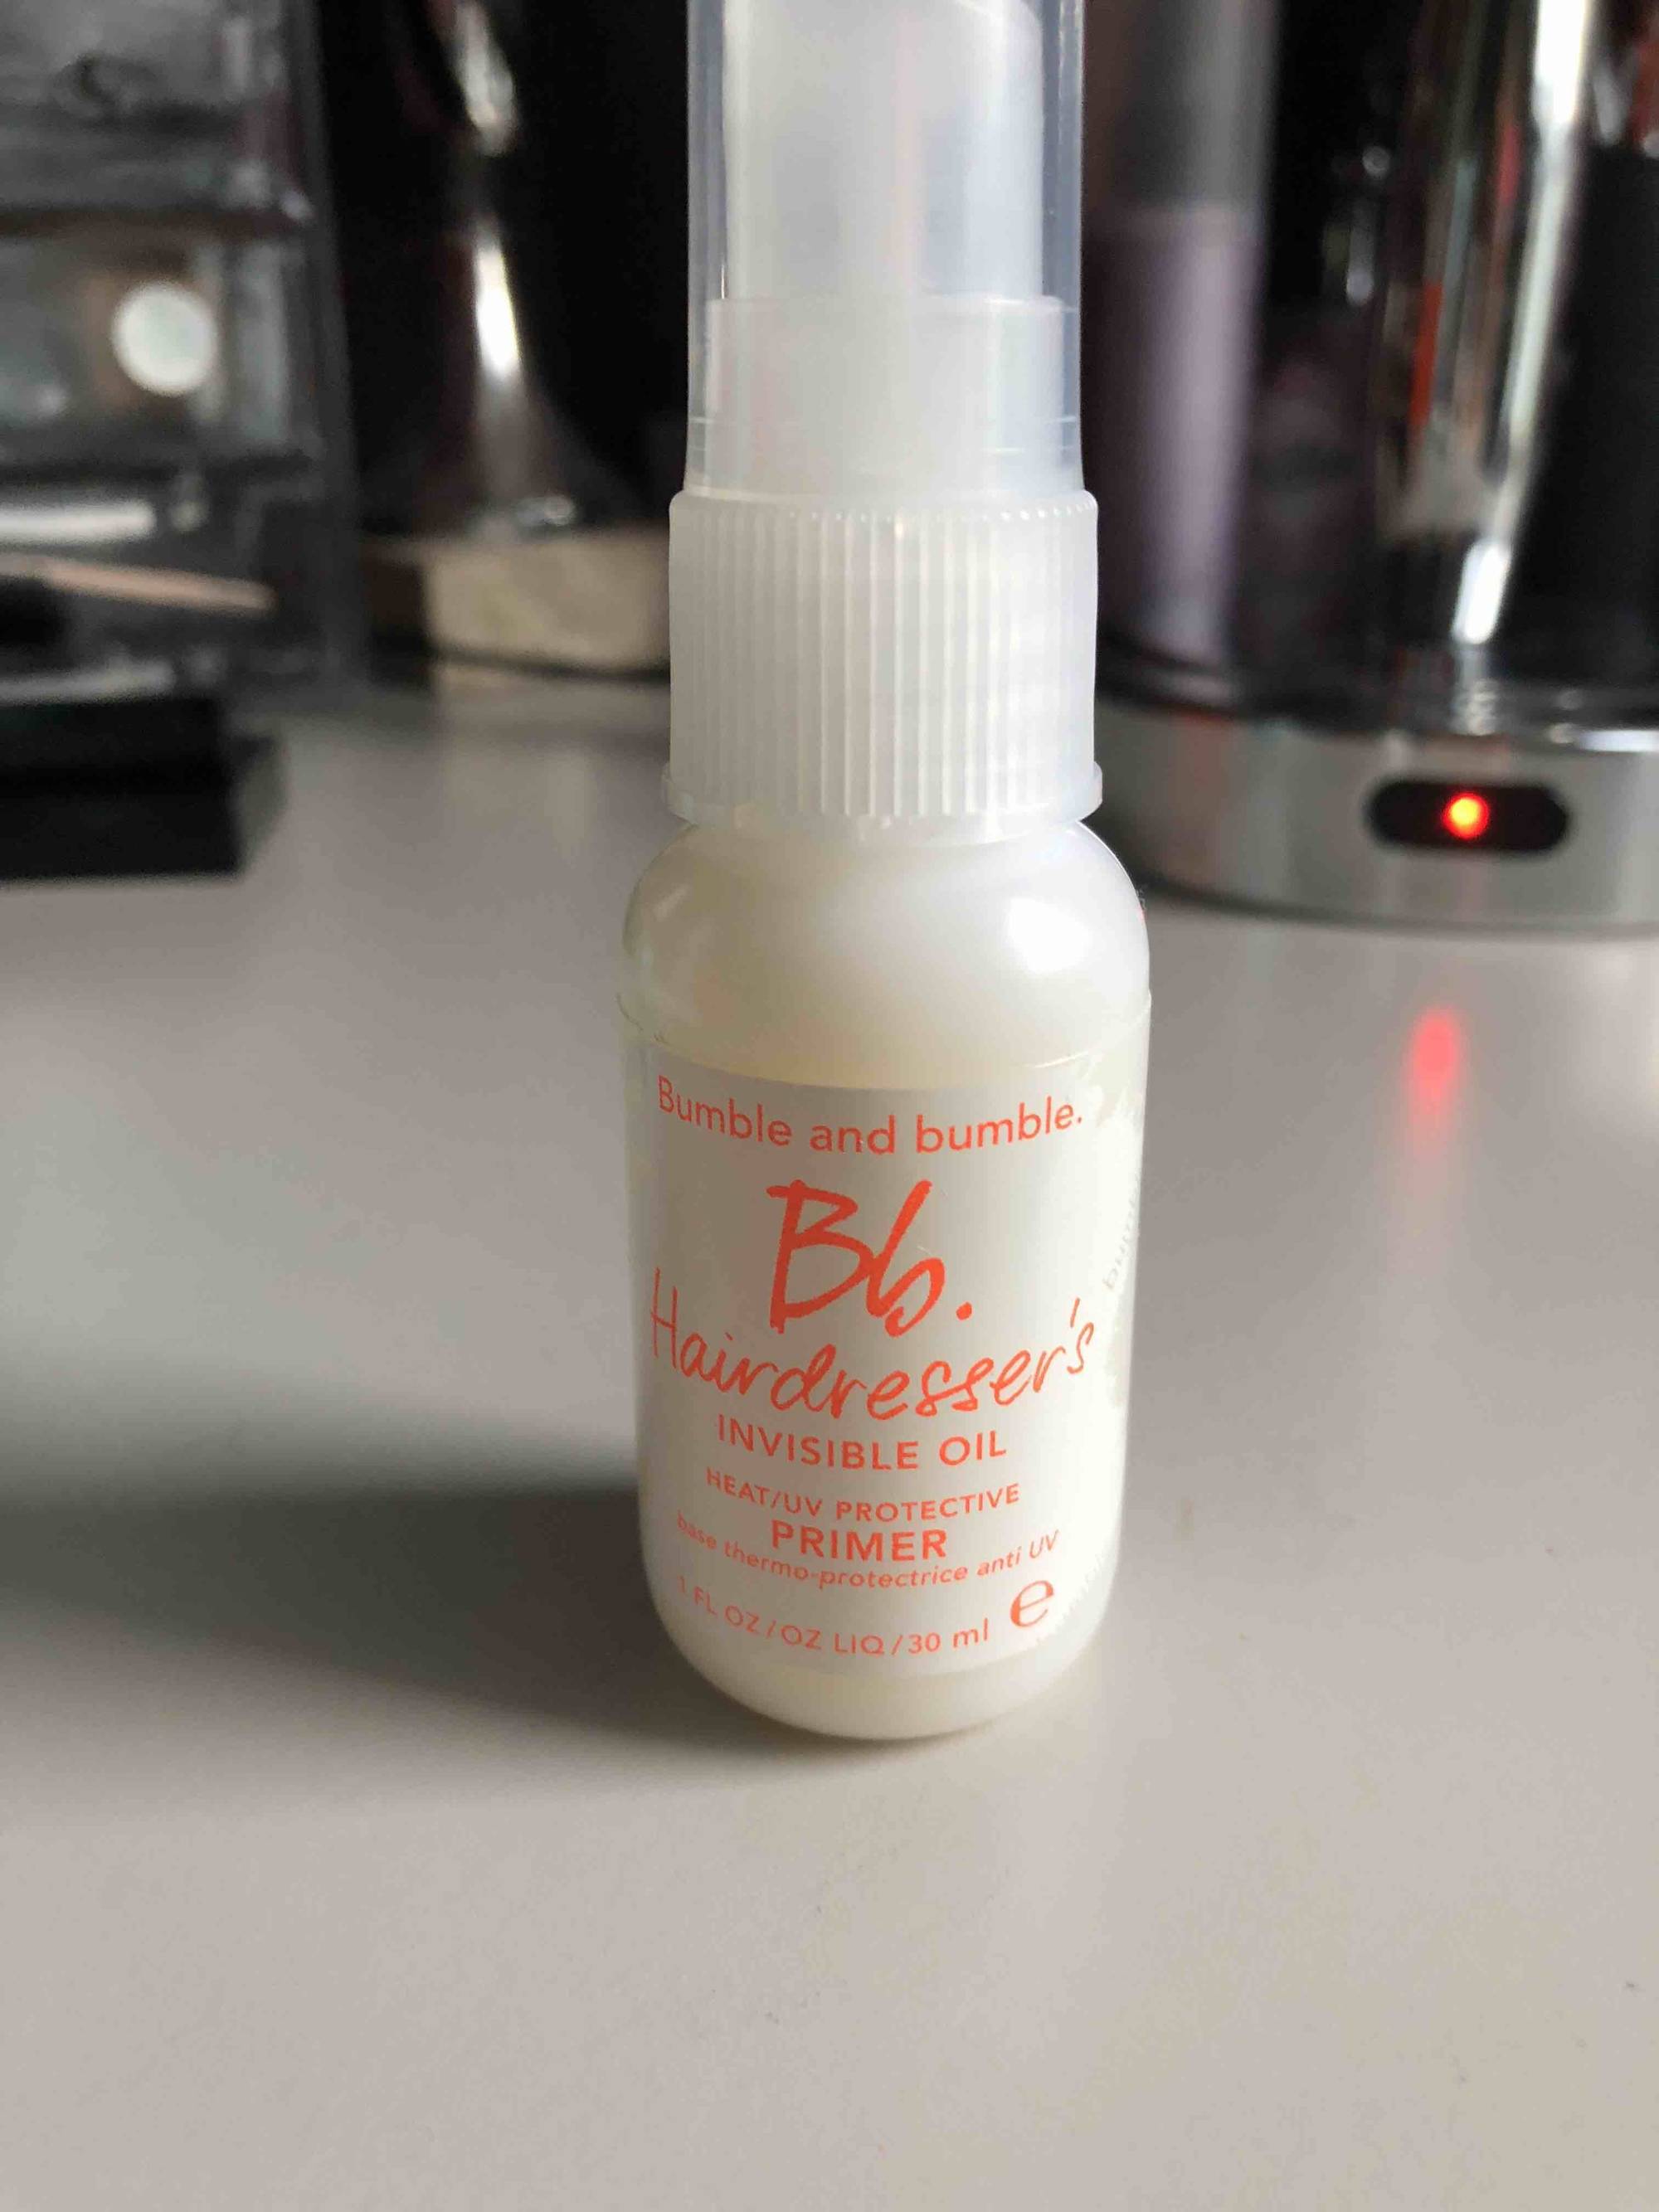 BUMBLE AND BUMBLE - Hair dresser's invisible oil primer